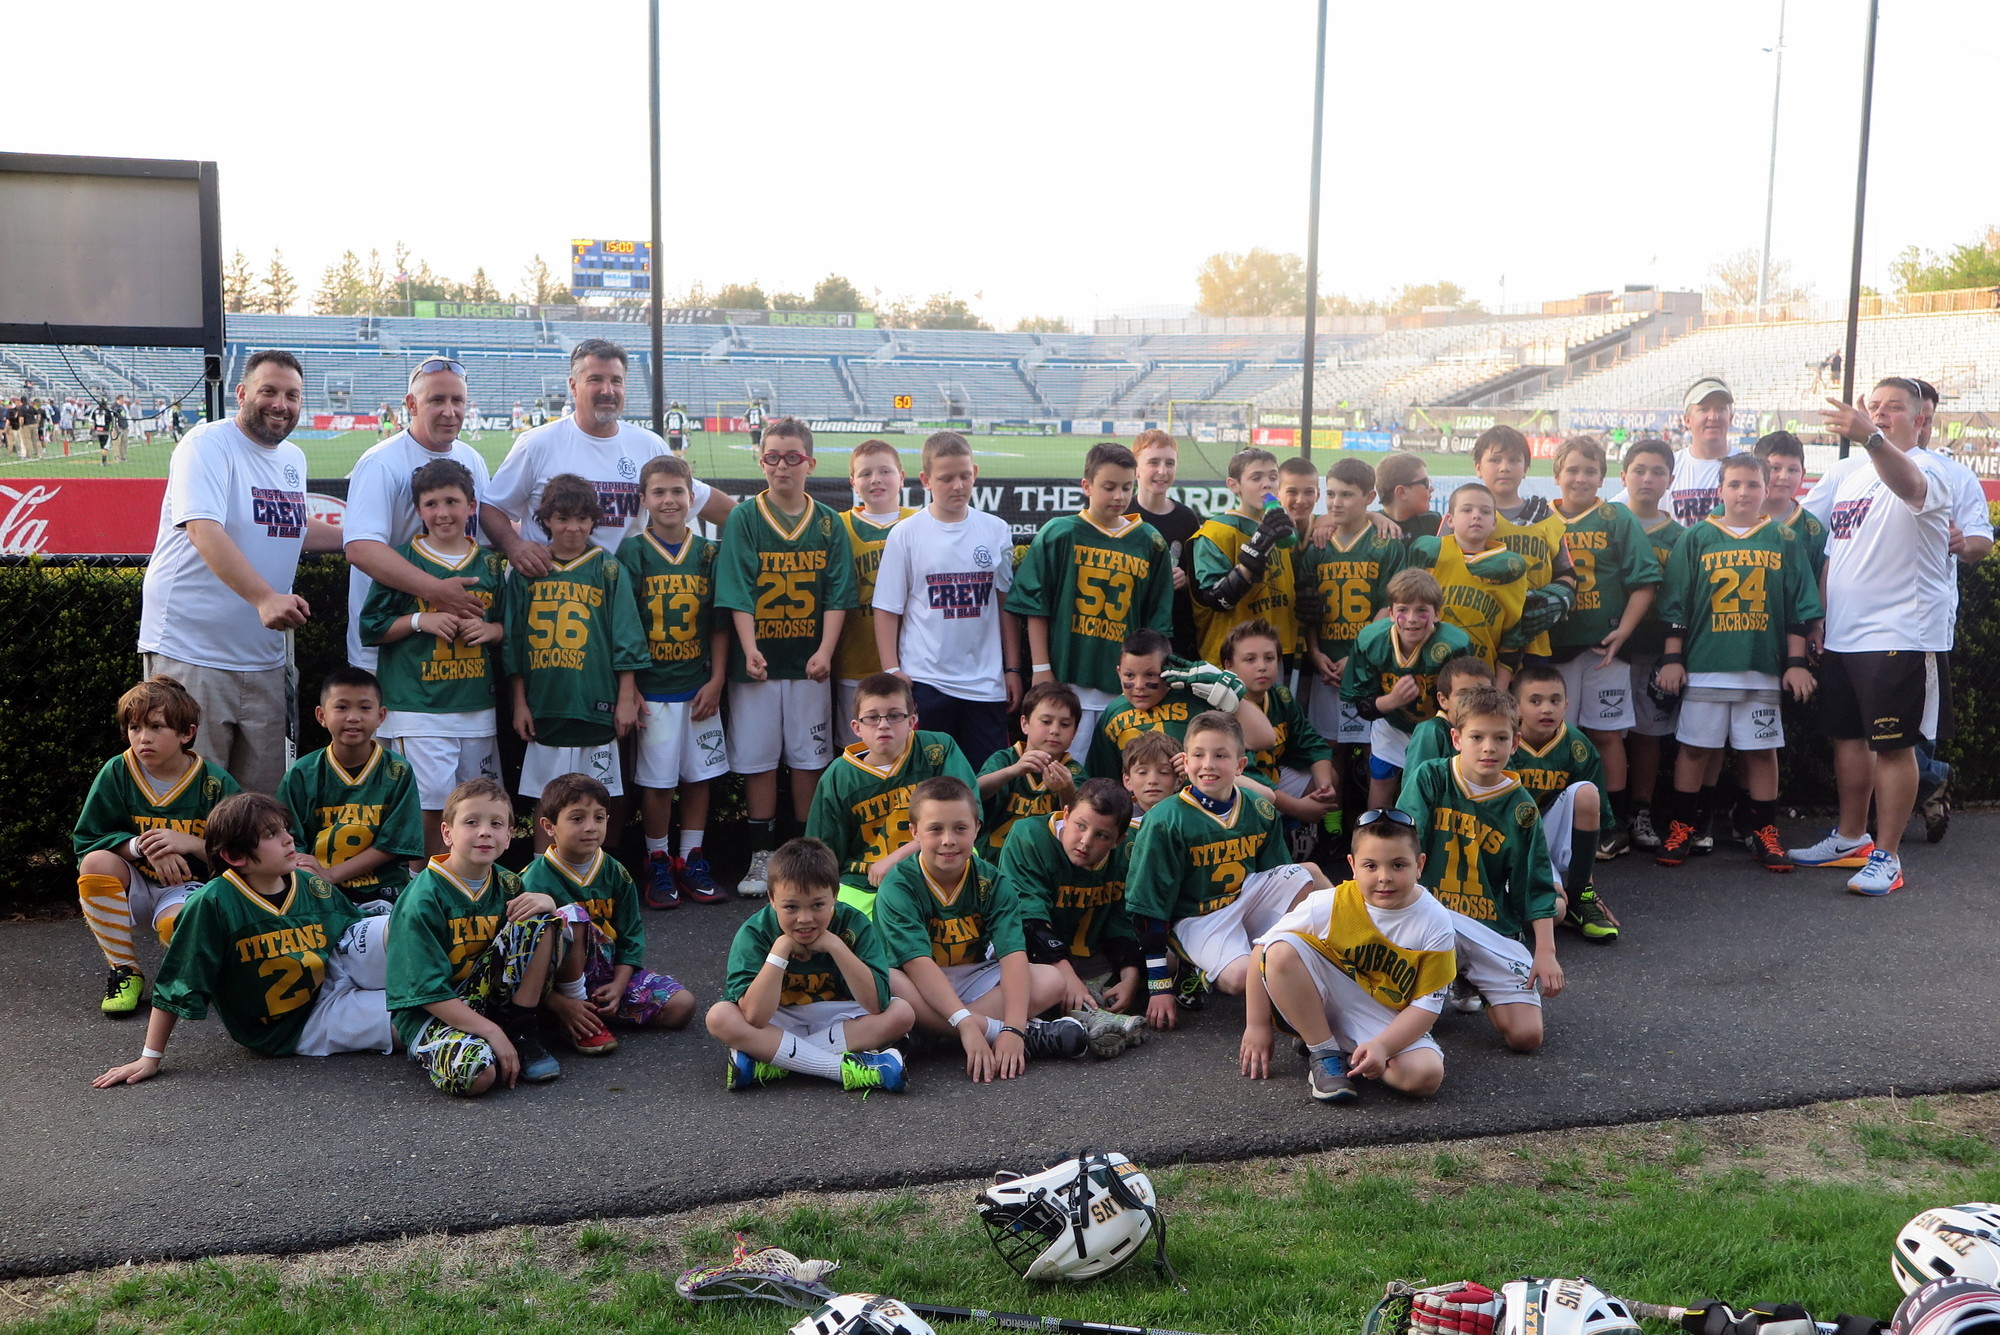 The Lynbrook Titans fourth and fifth-graders played on the field in honor of their friend Christopher, who has severe hemophilia. The group raised more than $2,000 in ticket sales at the event.